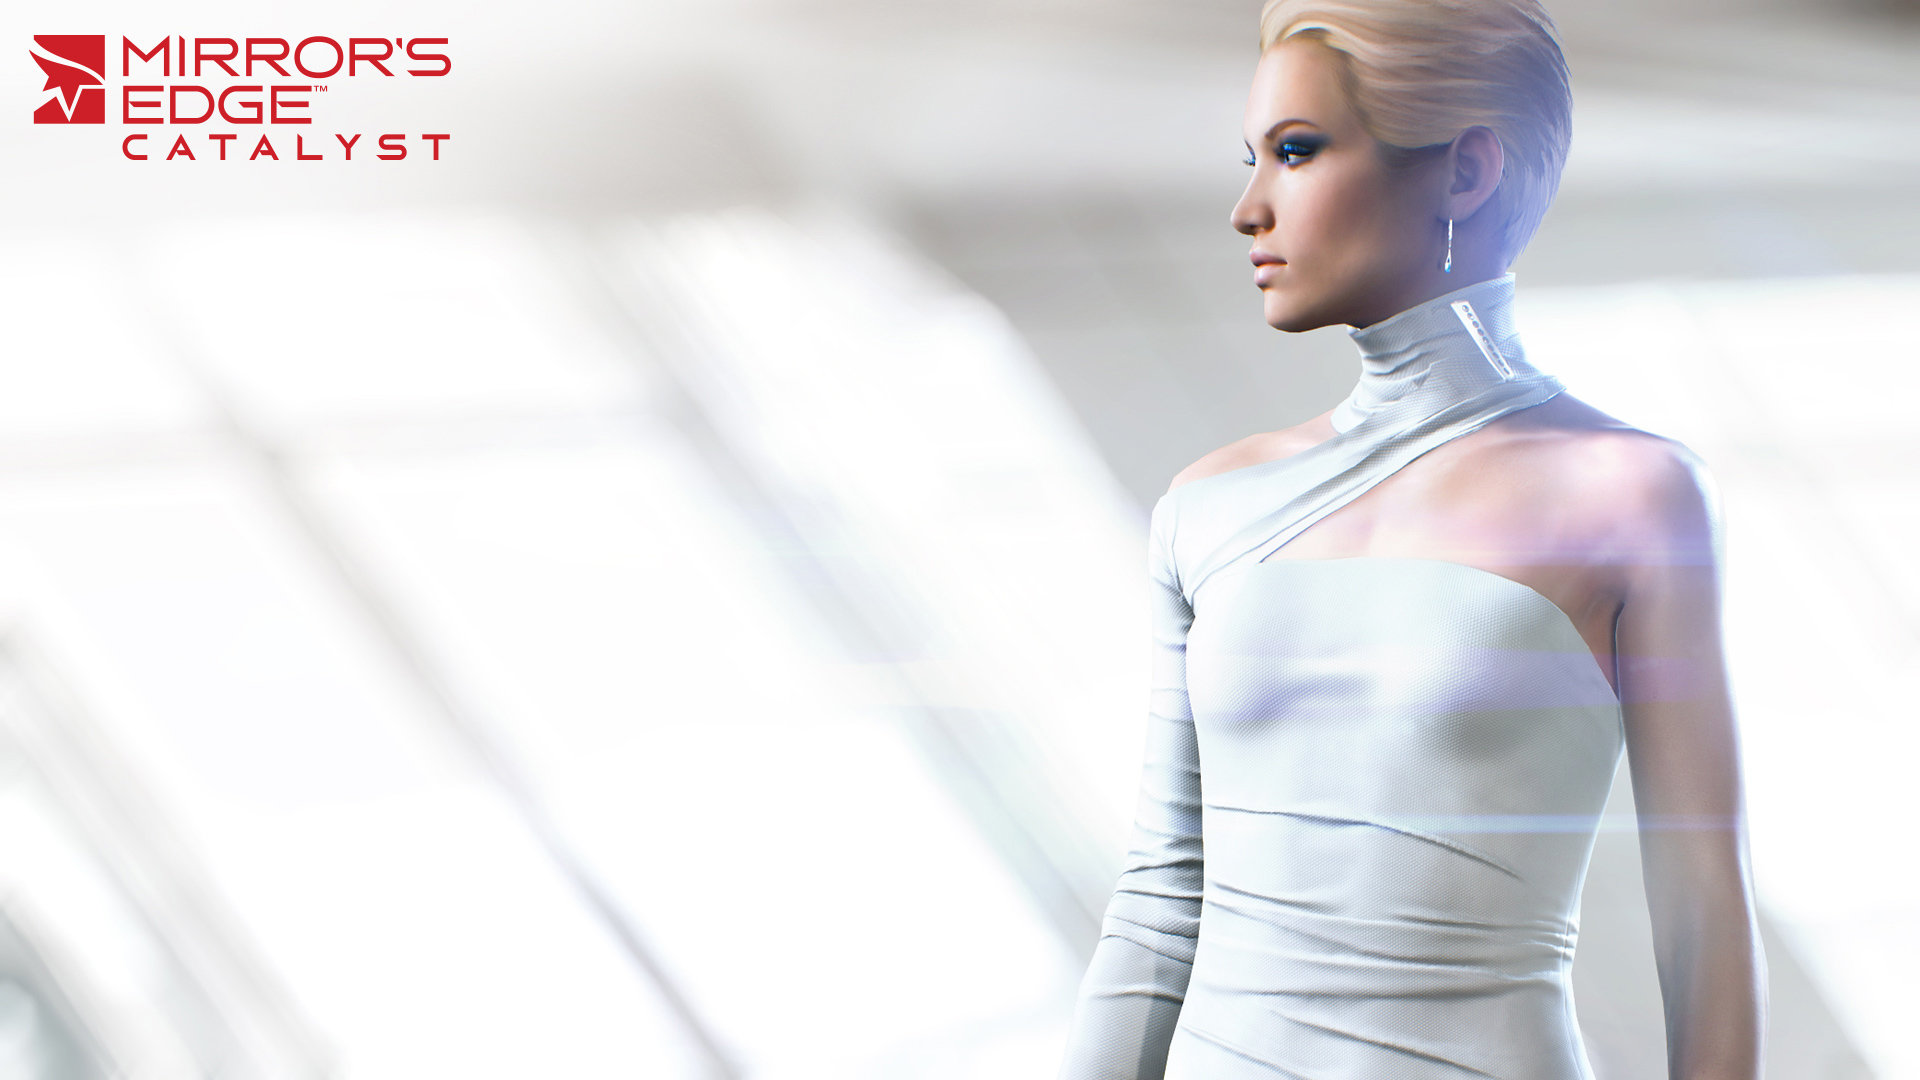 High resolution Mirror's Edge Catalyst full hd background ID:219555 for computer